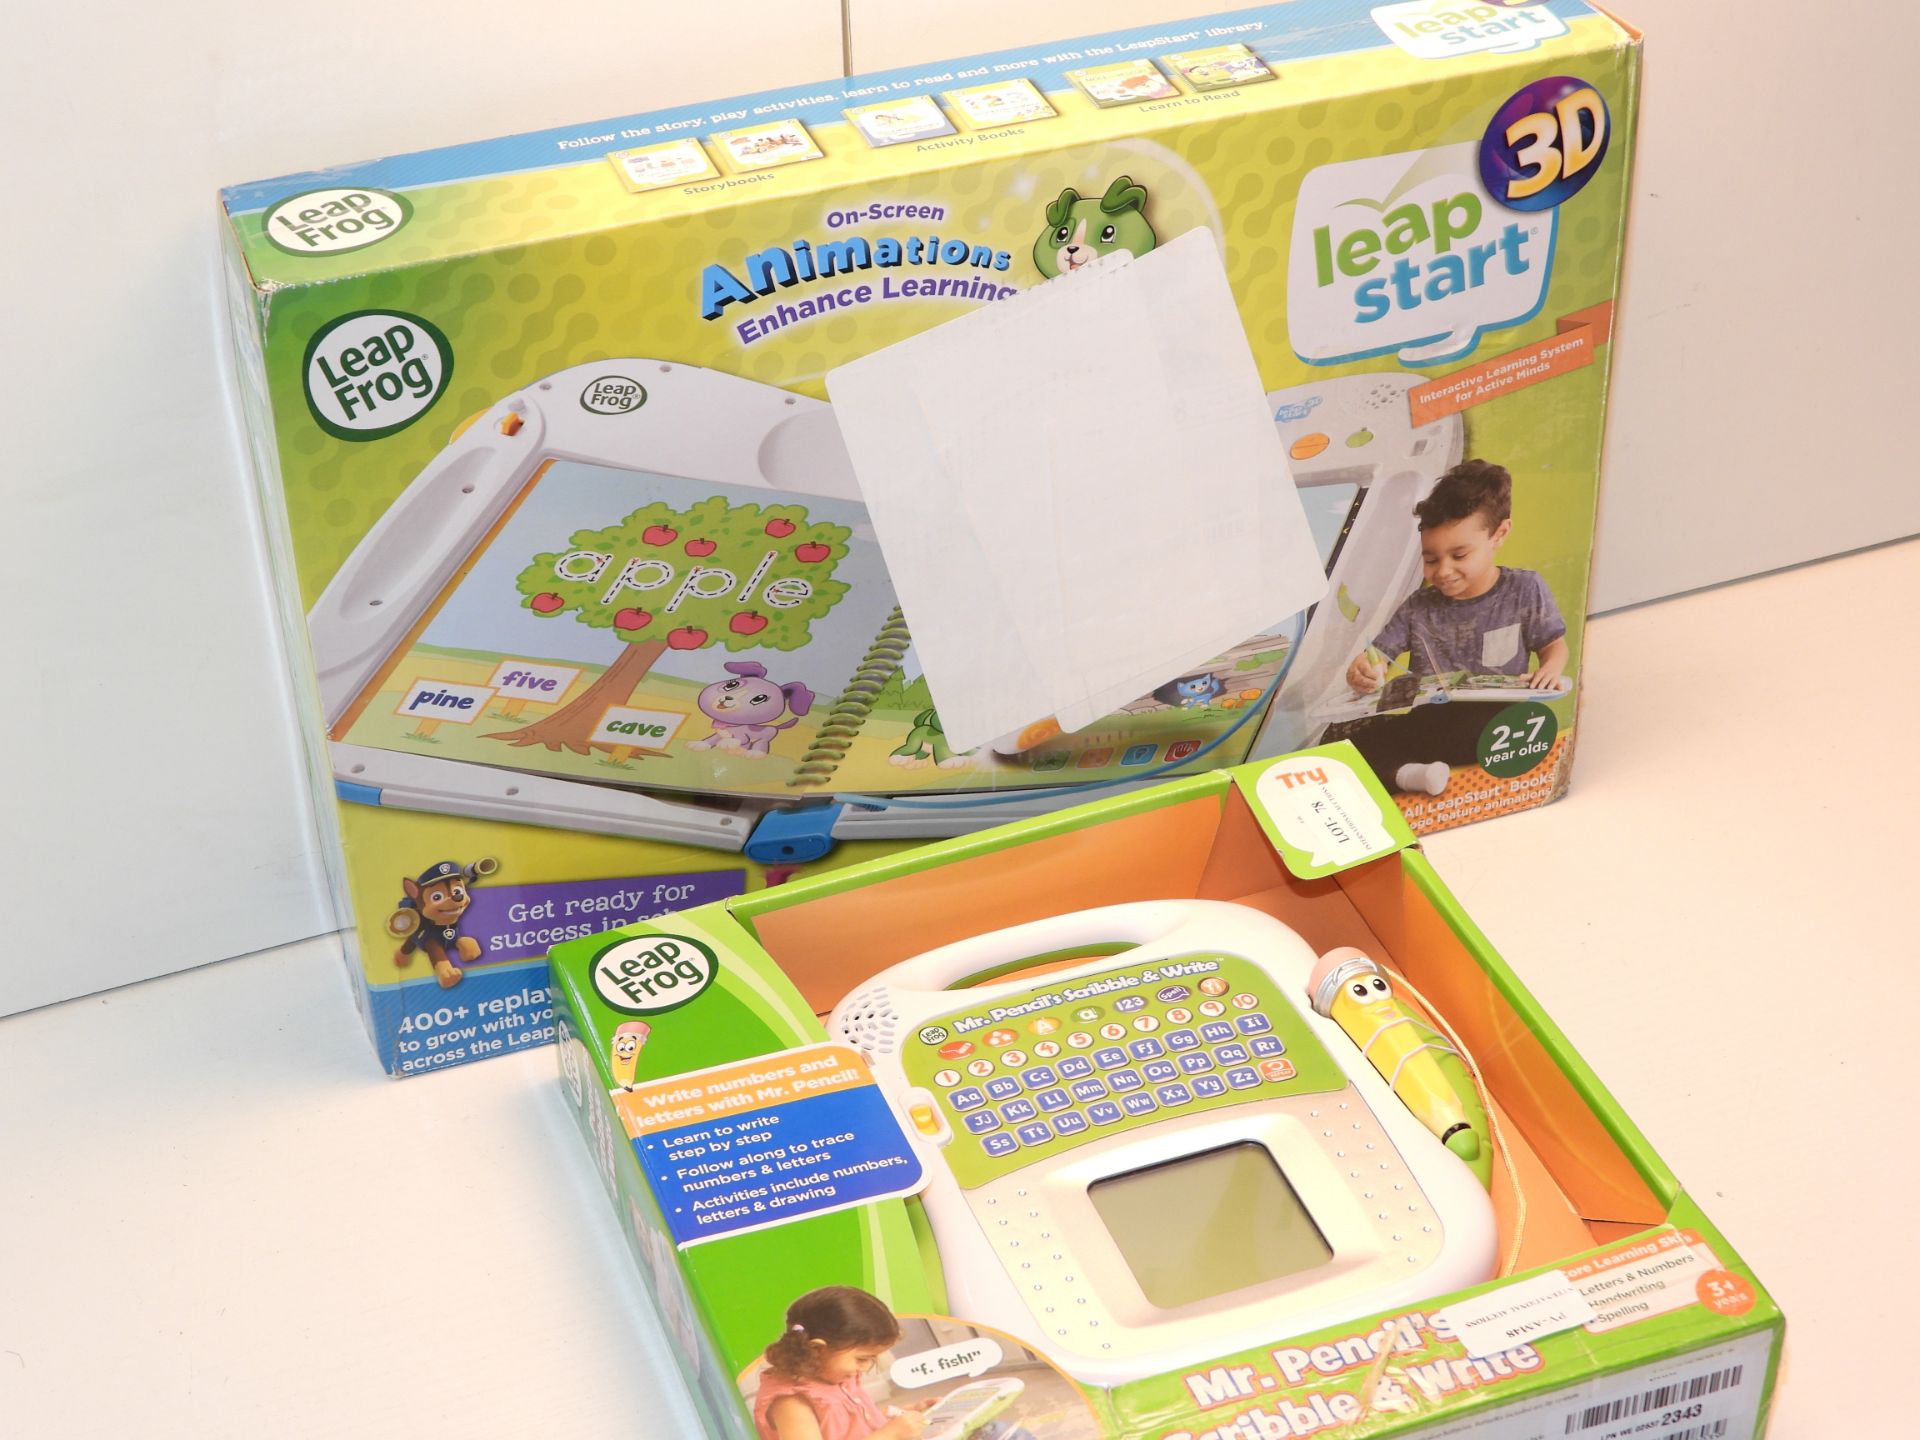 2X BOXED LEAP FROG LEAP START ITEMS (IMAGE DEPICTS STOCK)Condition ReportAppraisal Available on